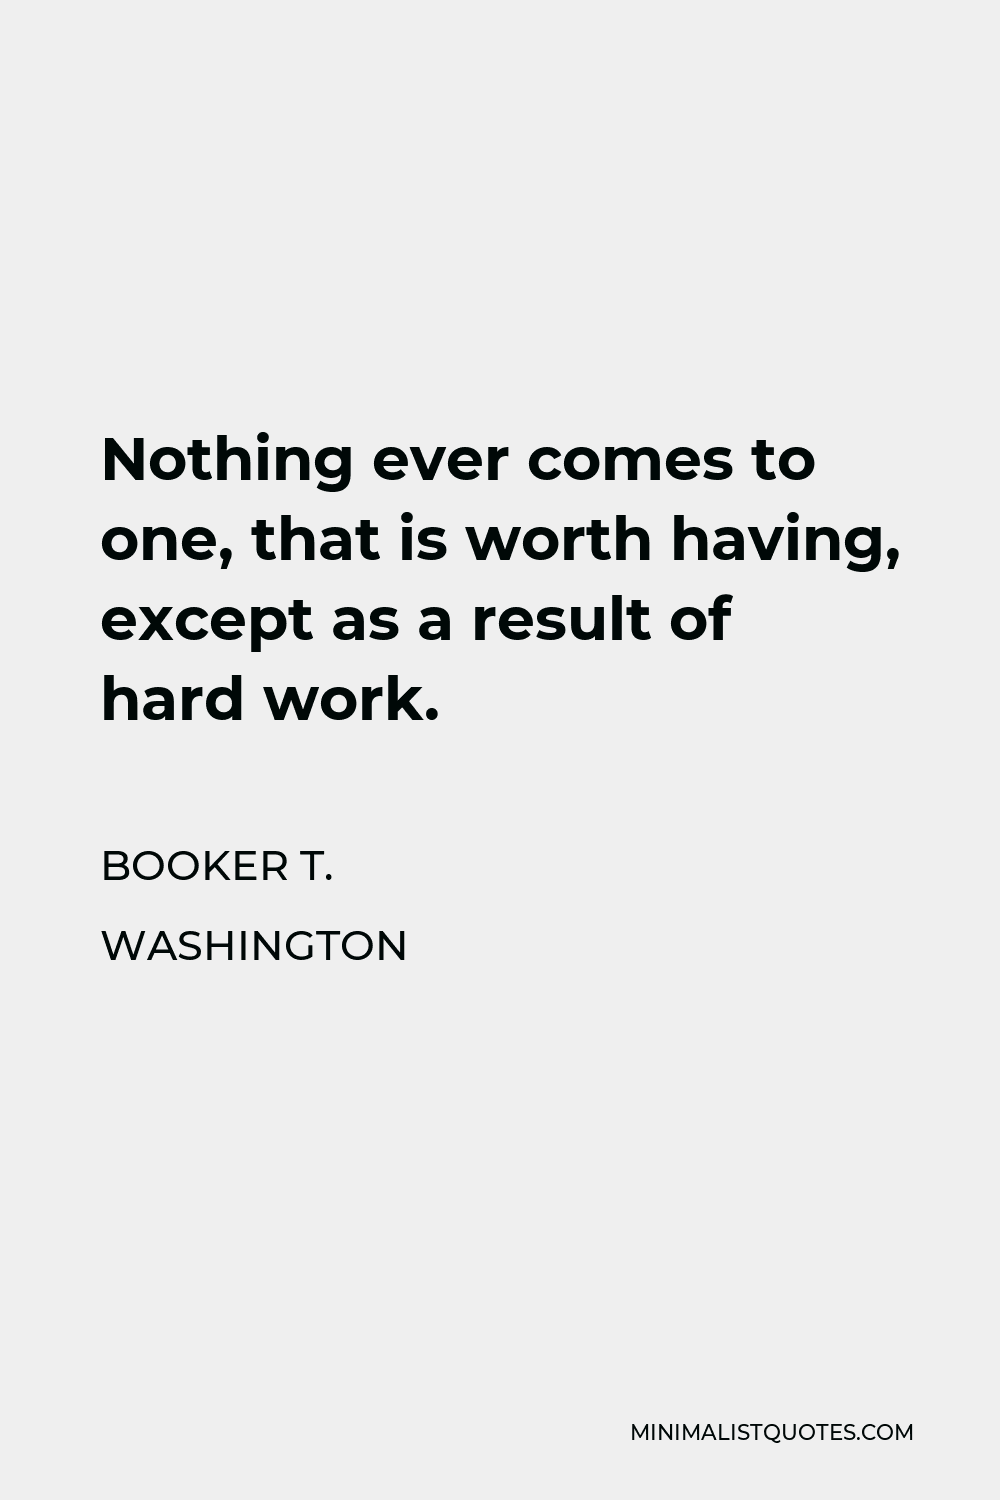 Booker T. Washington Quote - Nothing ever comes to one, that is worth having, except as a result of hard work.